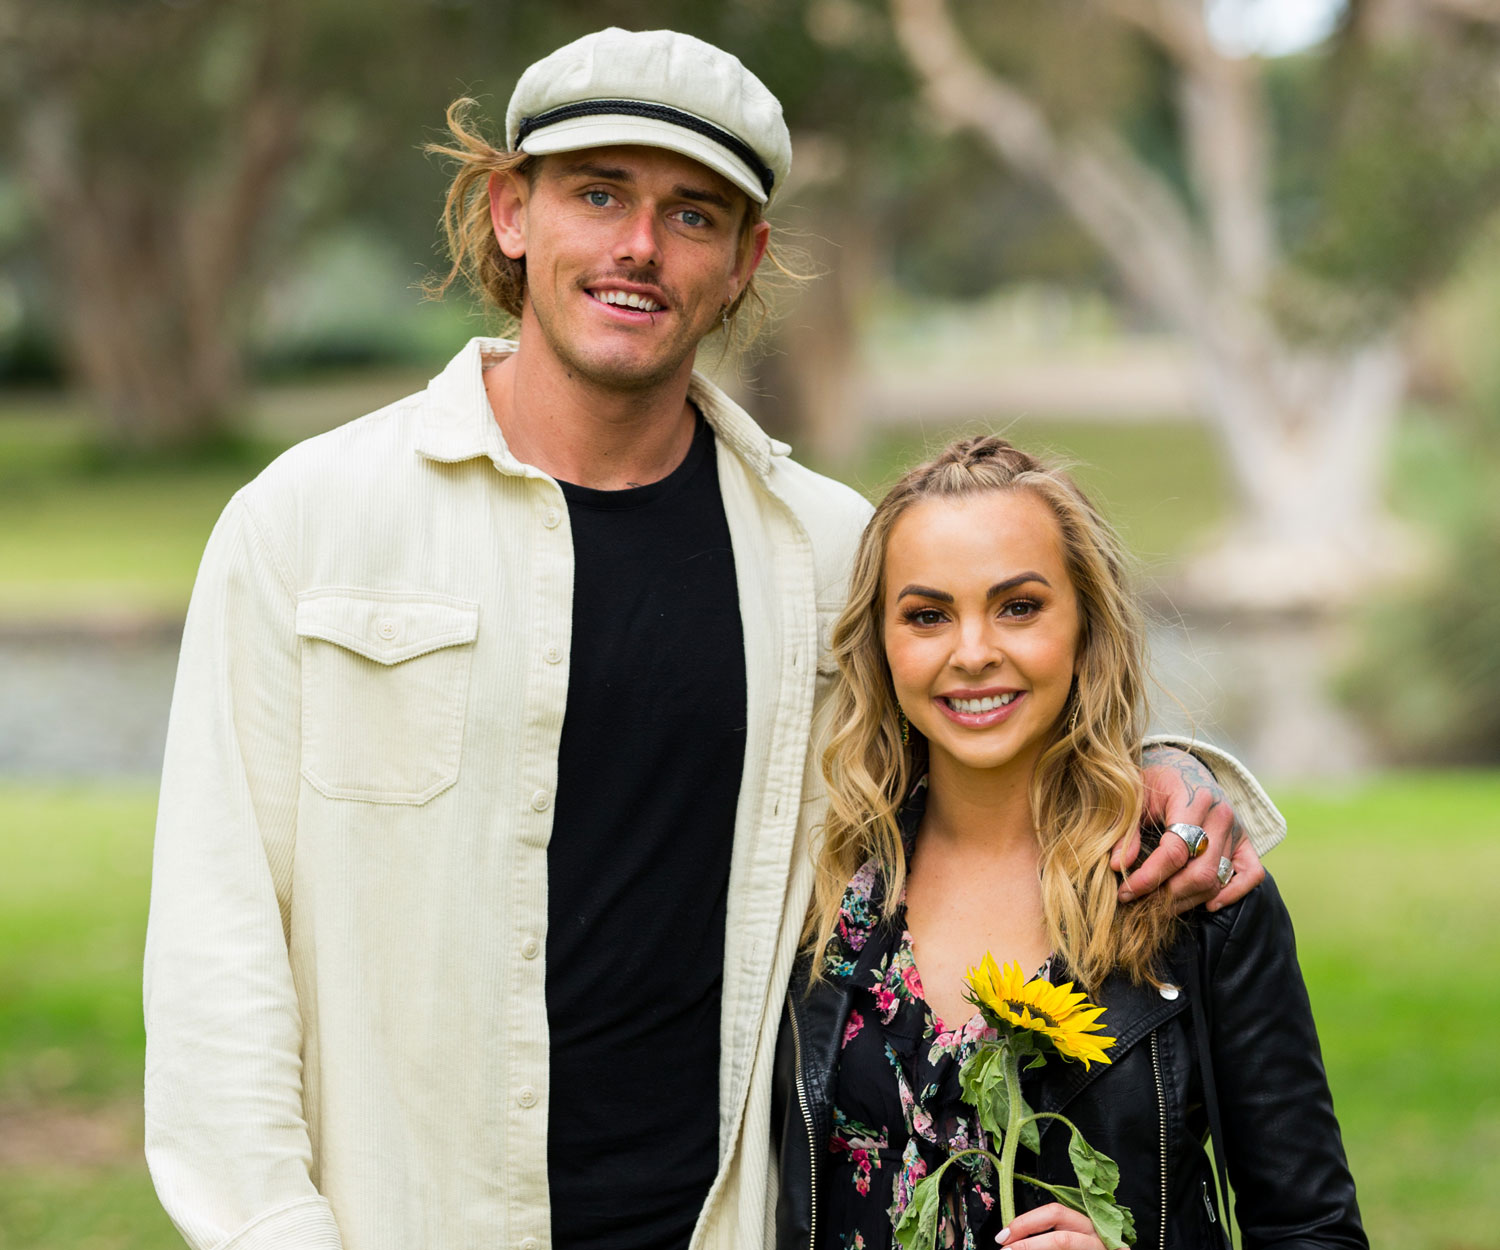 Timm Hanly is convinced his hometown visit ruined his relationship with Angie on The Bachelorette